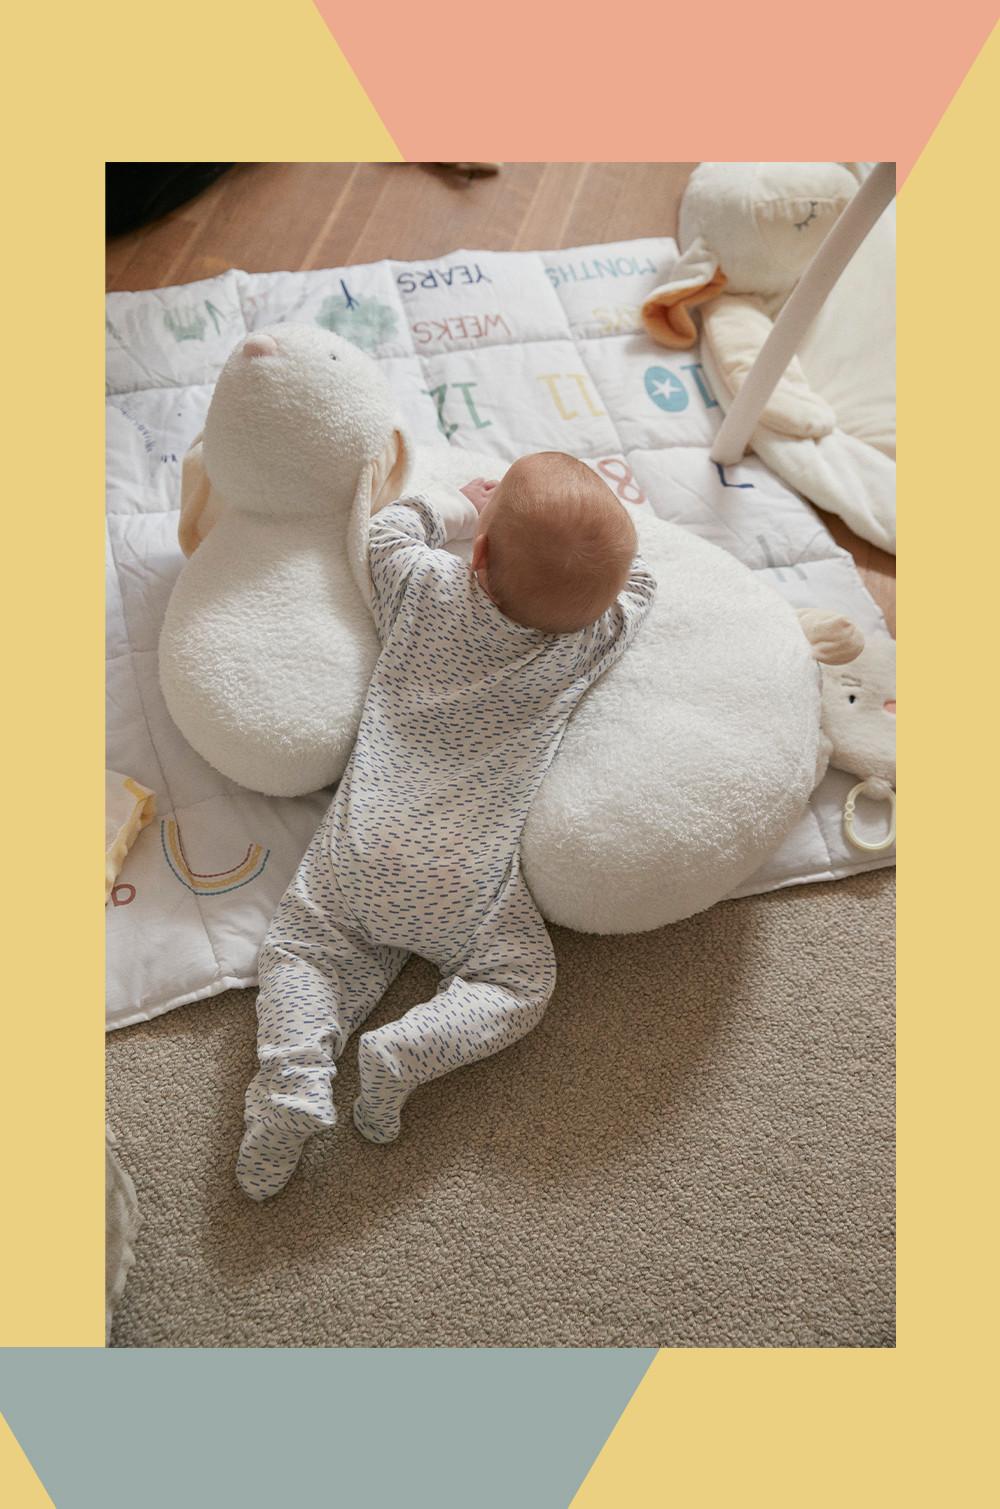 Baby lays on white bunny sit up cushion, with milestone blanket underneath